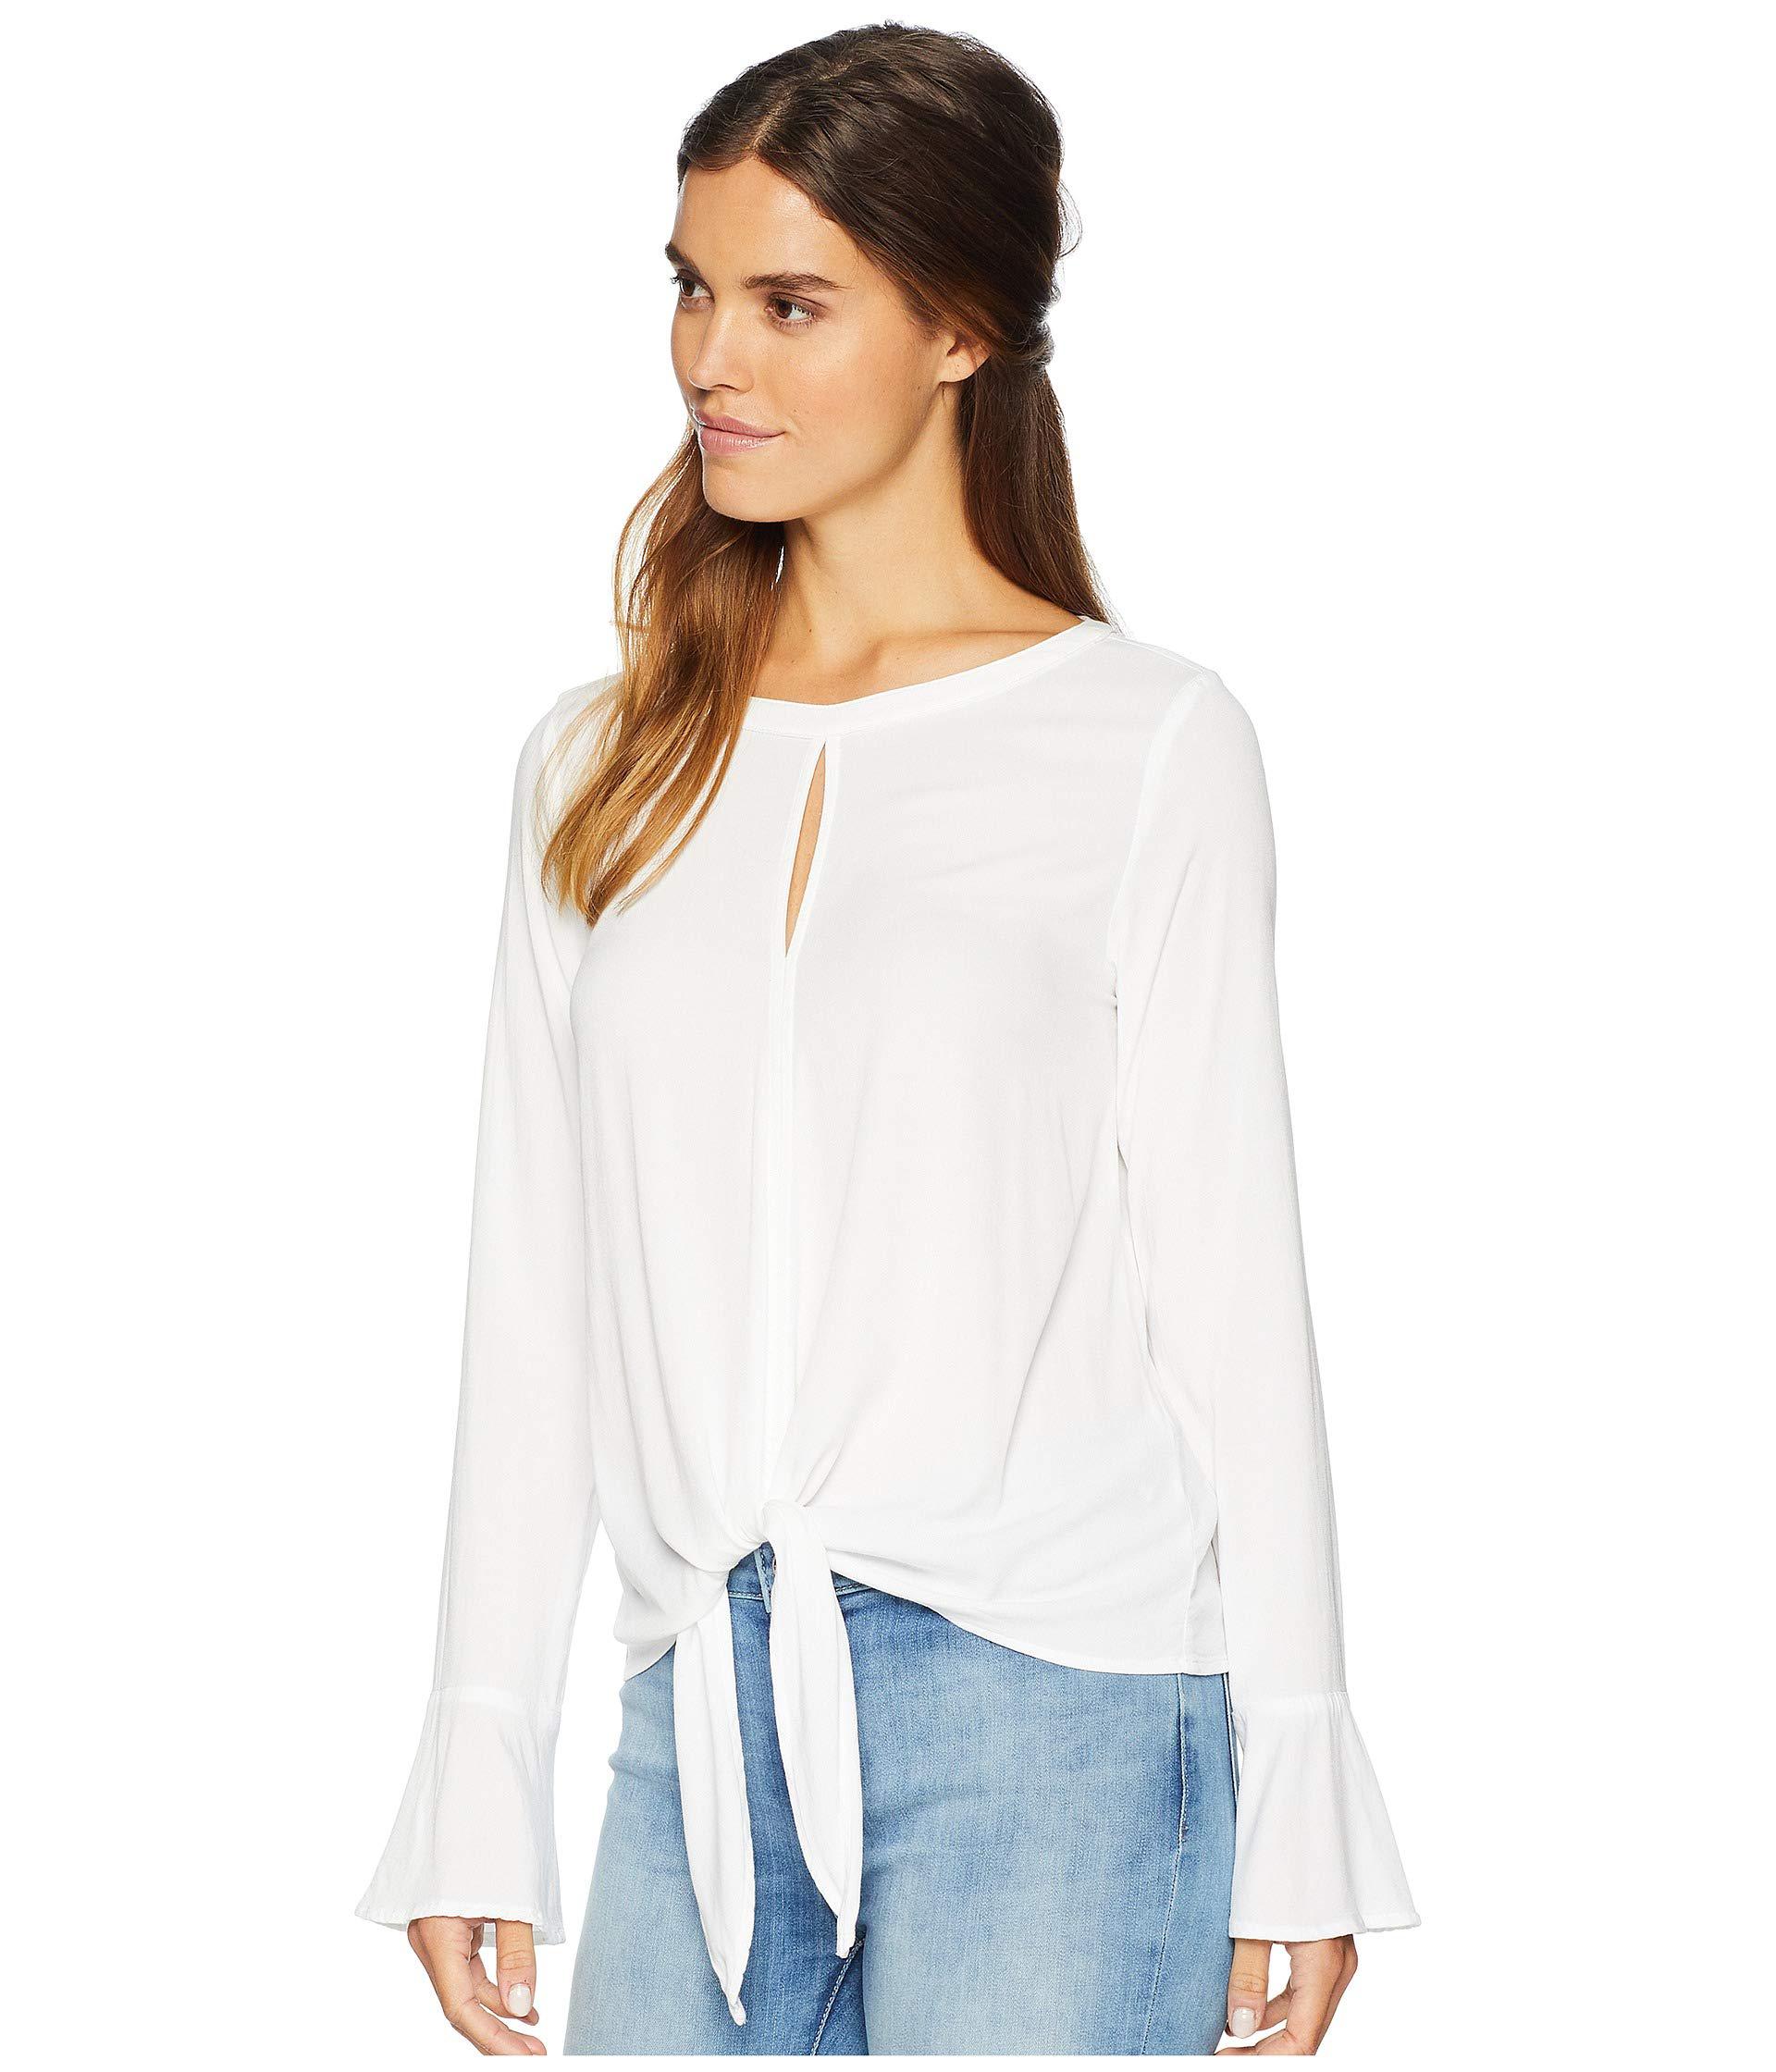 Lyst - Michael Stars Rylie Rayon Knotted Blouse (white) Women's Blouse ...